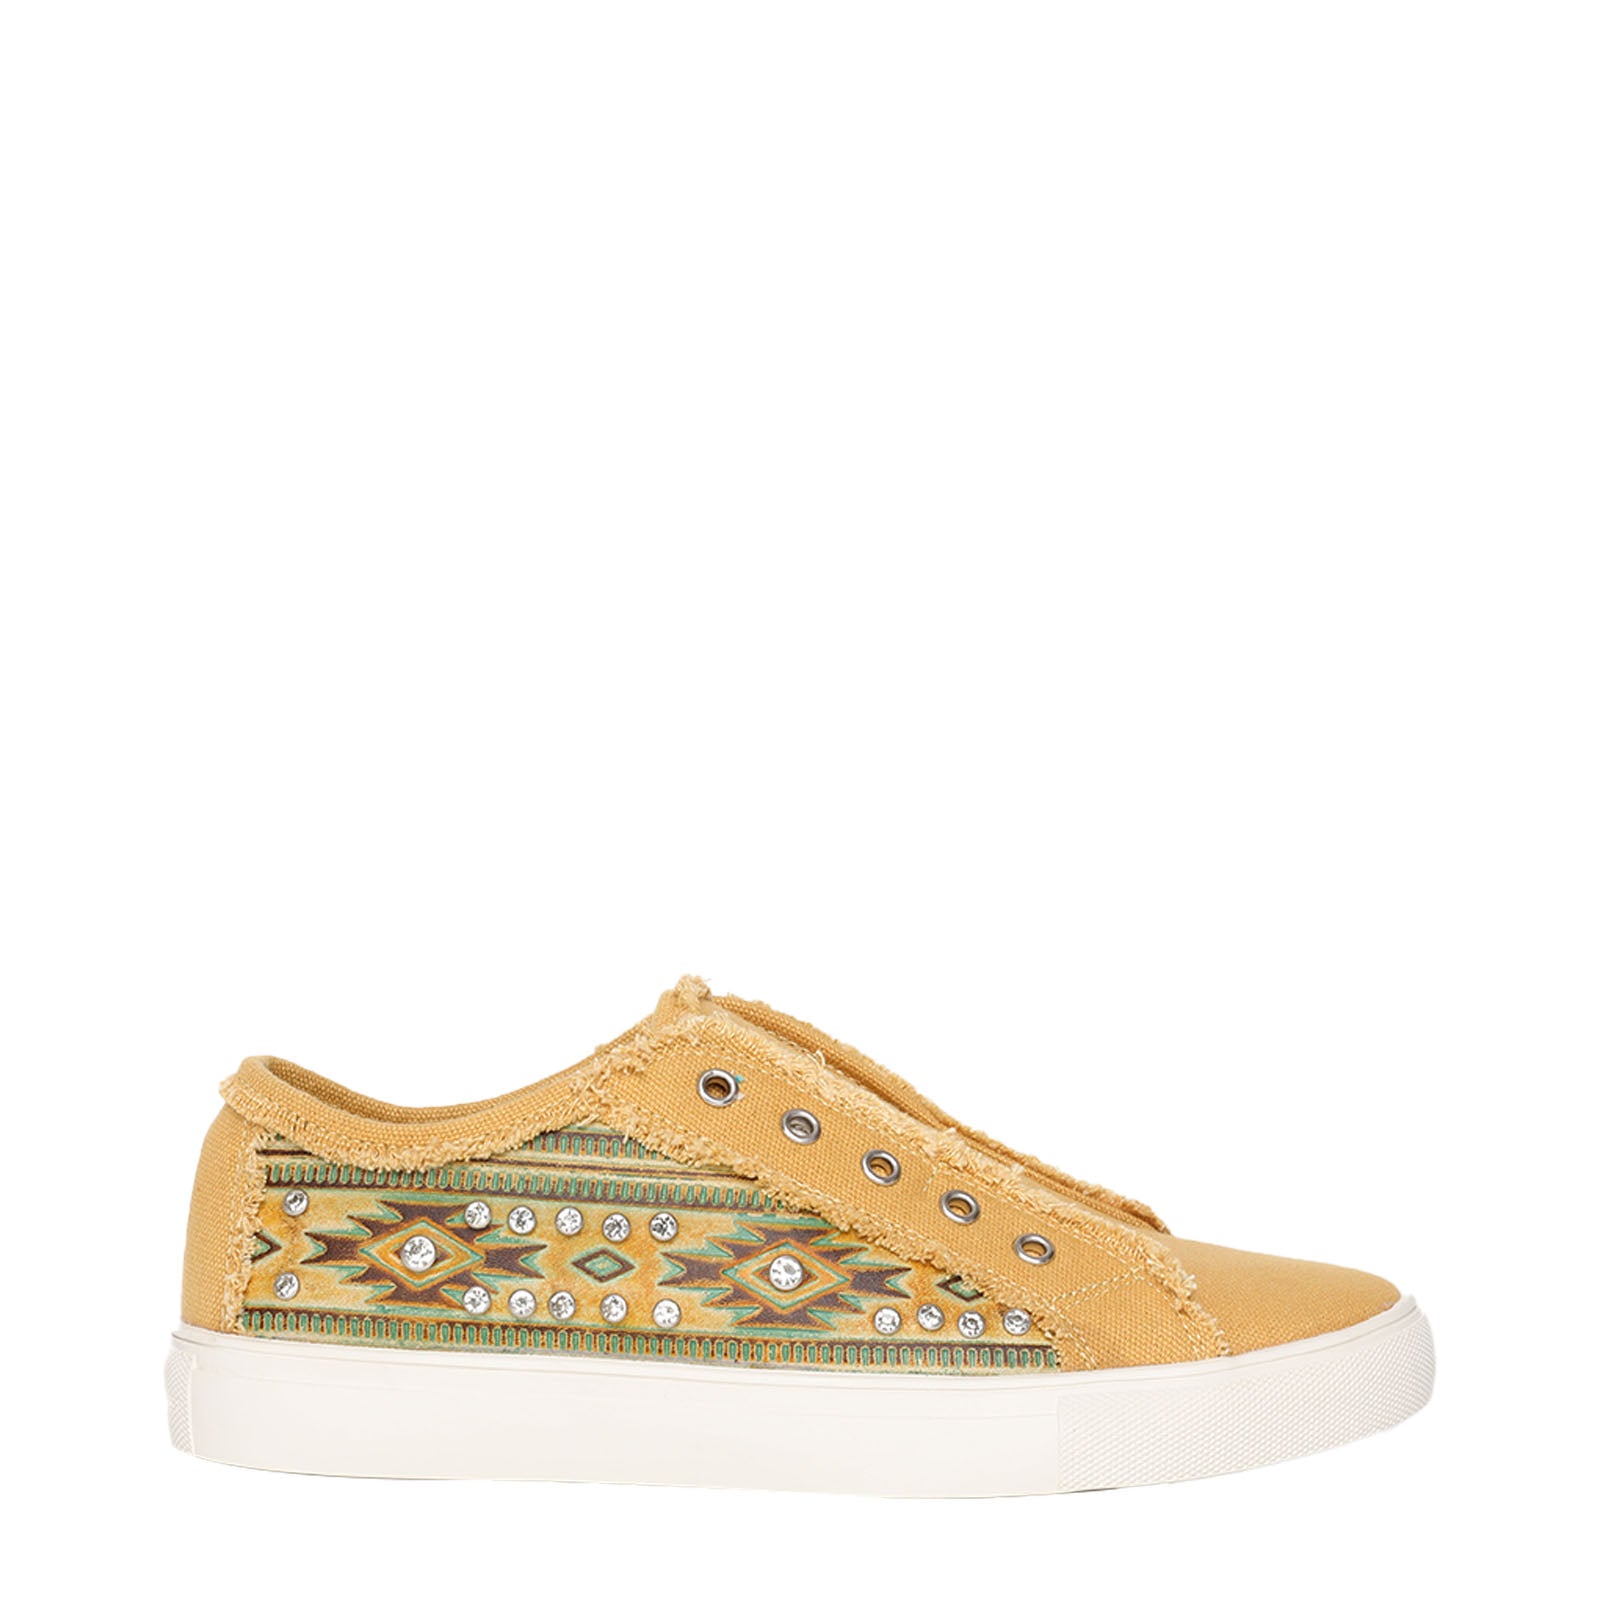 Montana West Aztec Printed Canvas Shoes - Cowgirl Wear